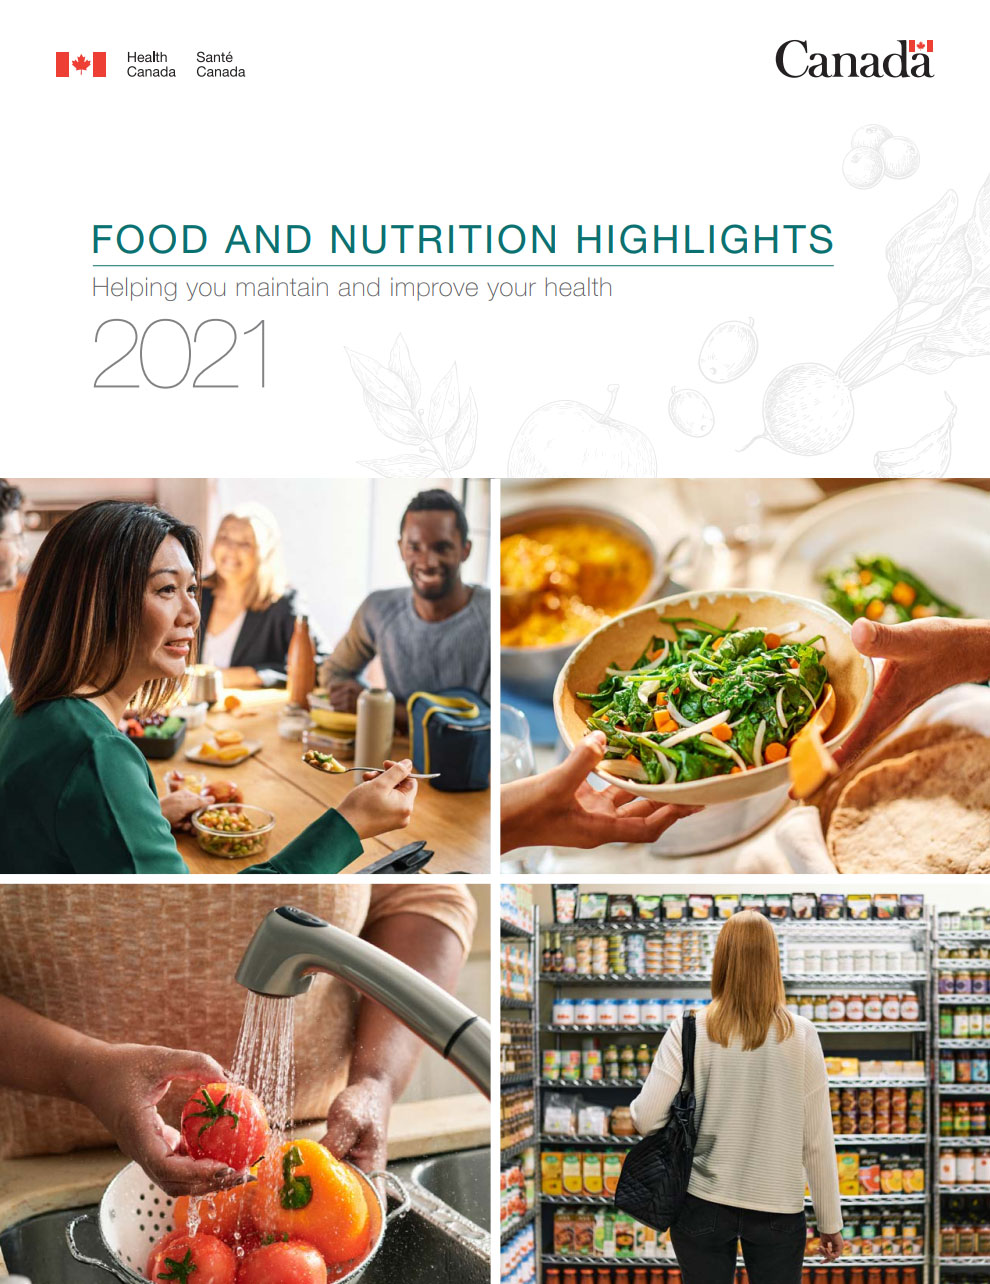 Food and nutrition highlights 2021